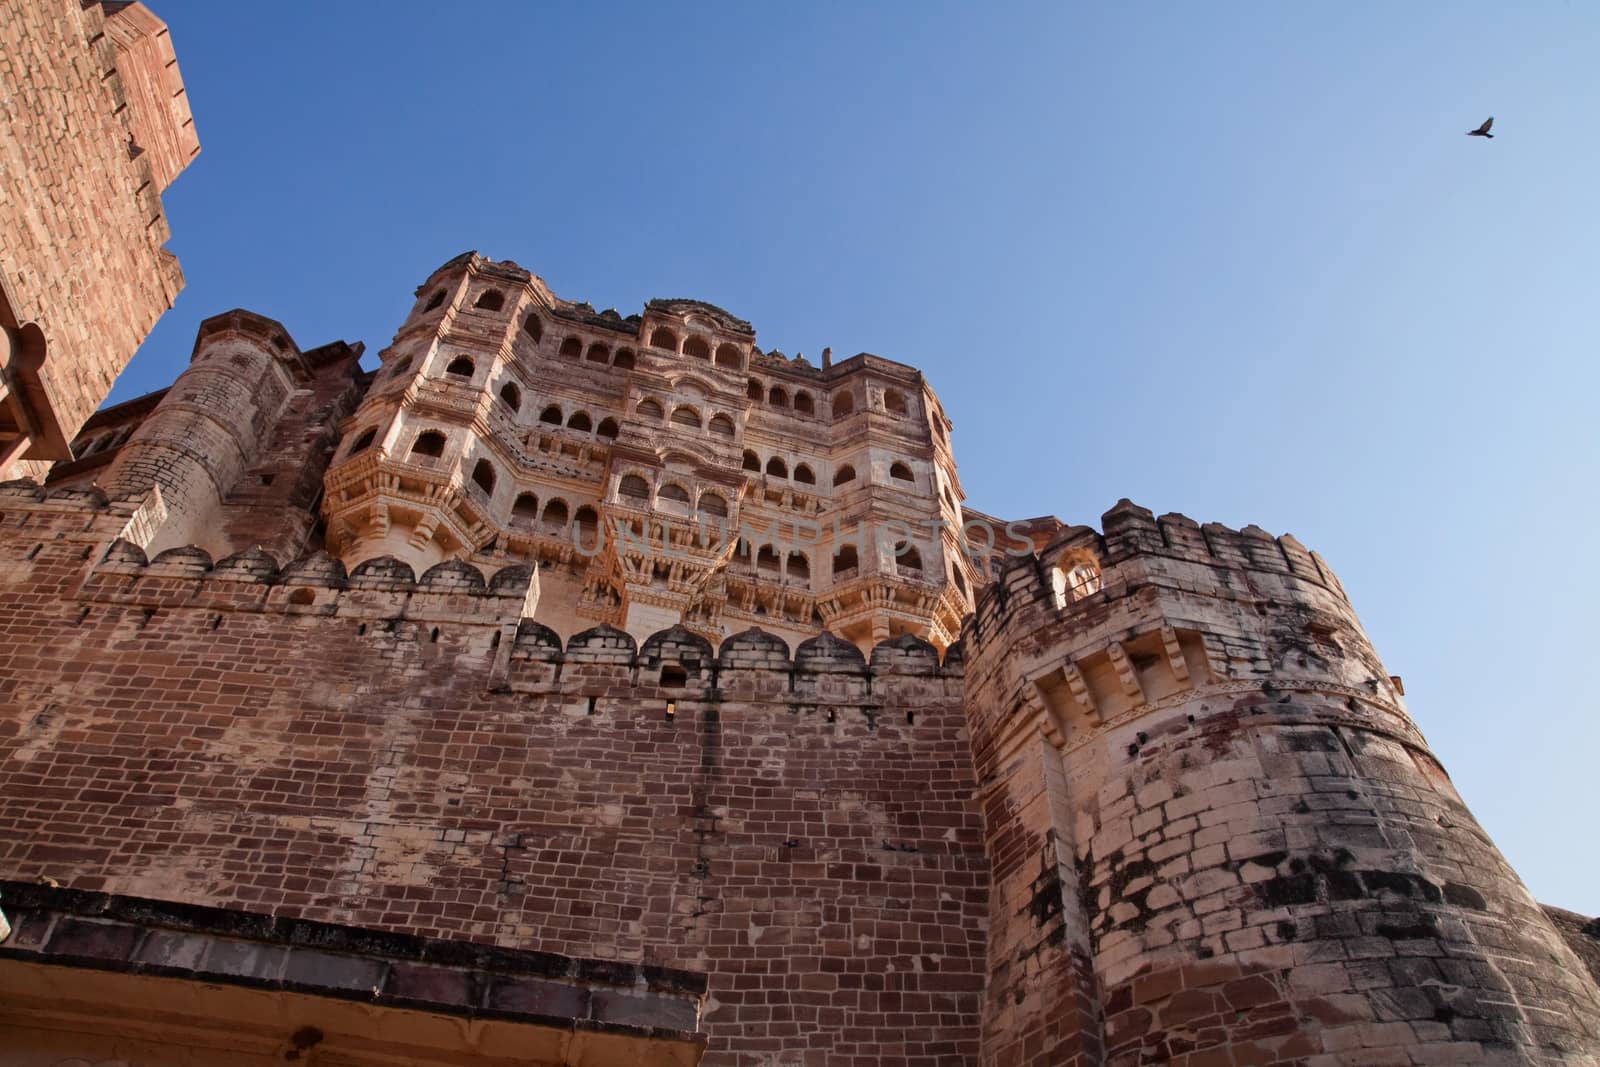 the meherangarh hill fort in jodhpur, rajasthan, india is a majestic fort soaring four hundred feet into the sky. immediately on entering through the main gate,  the imposing sight of the redstone construction with towers , peepholes and windows present an arresting sight for any visitor